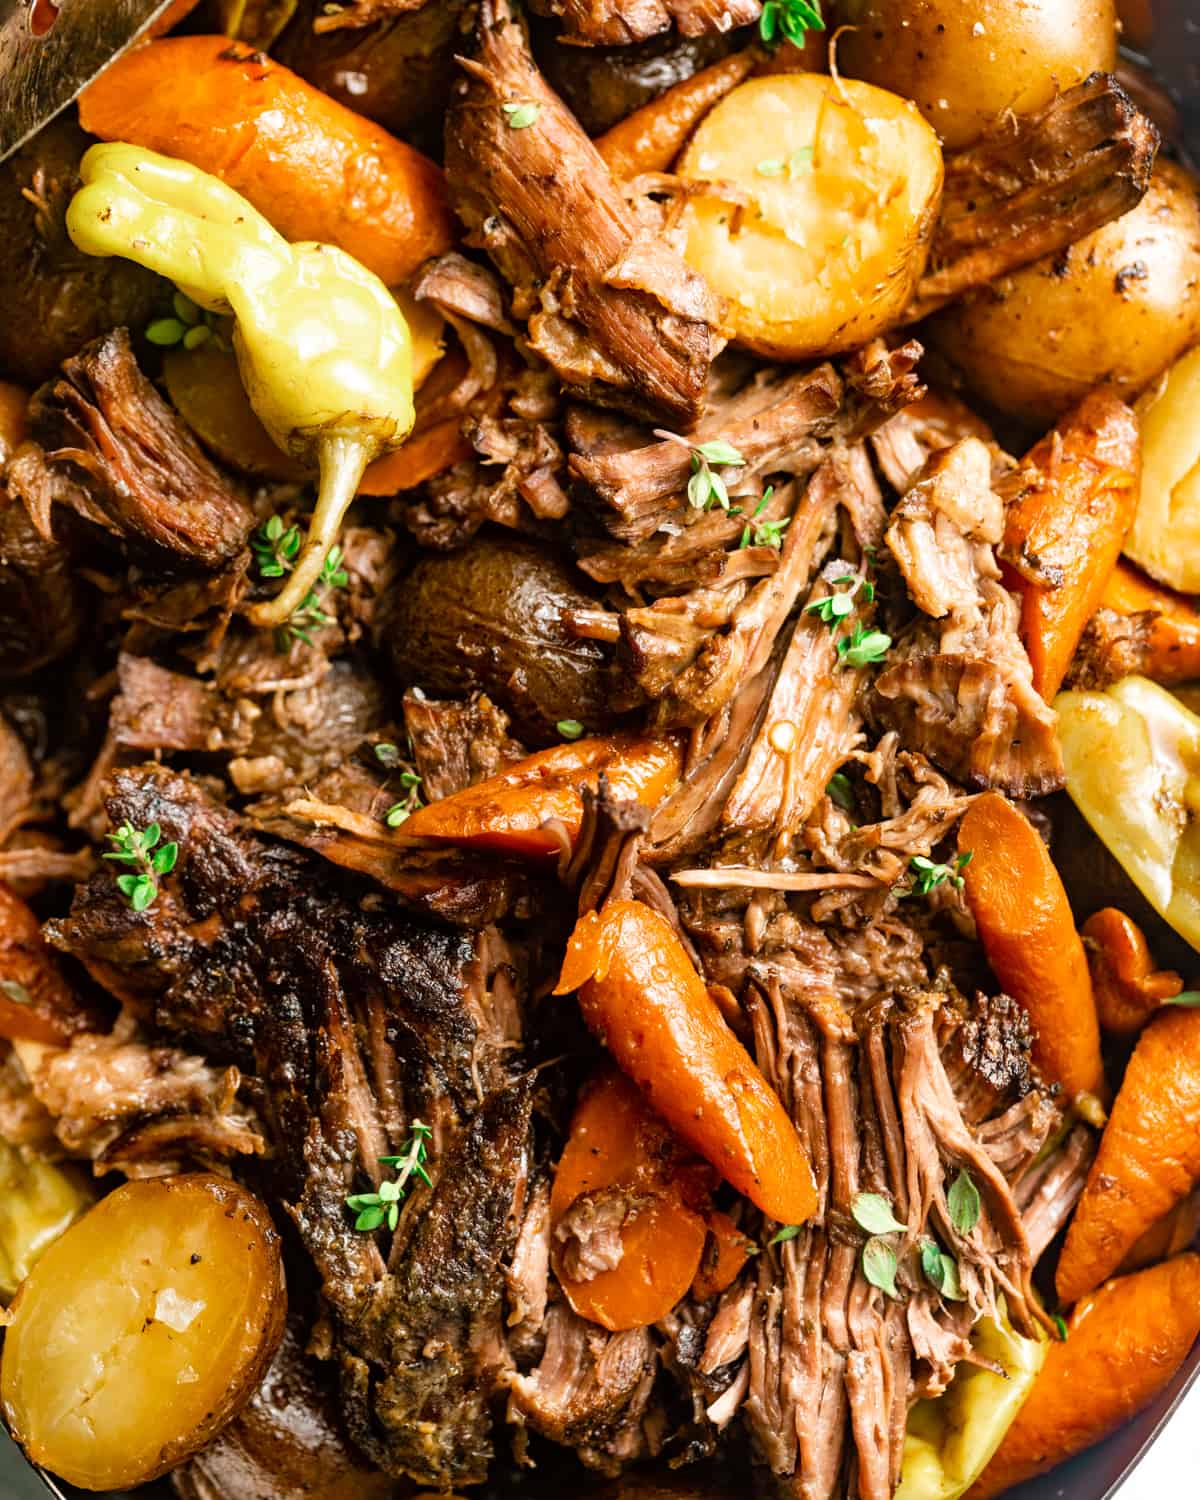 up close photo of mississippi pot roast cut into pieces with carrots and potatoes.